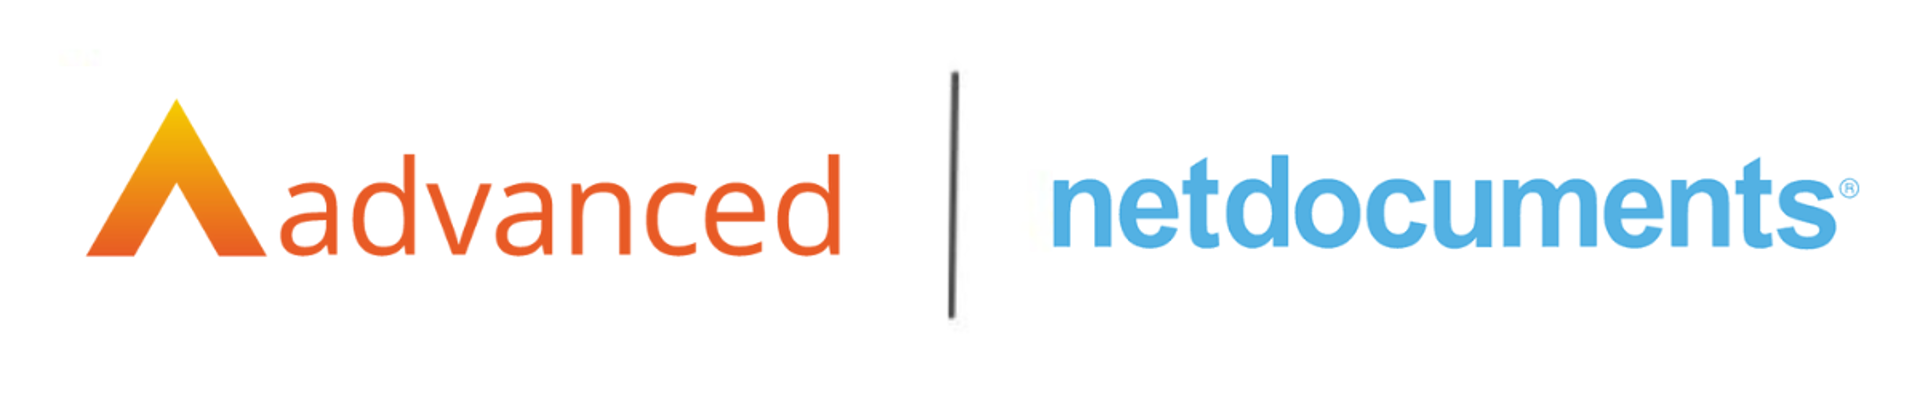 Advanced To Launch Official Integration With NetDocuments & P4W 